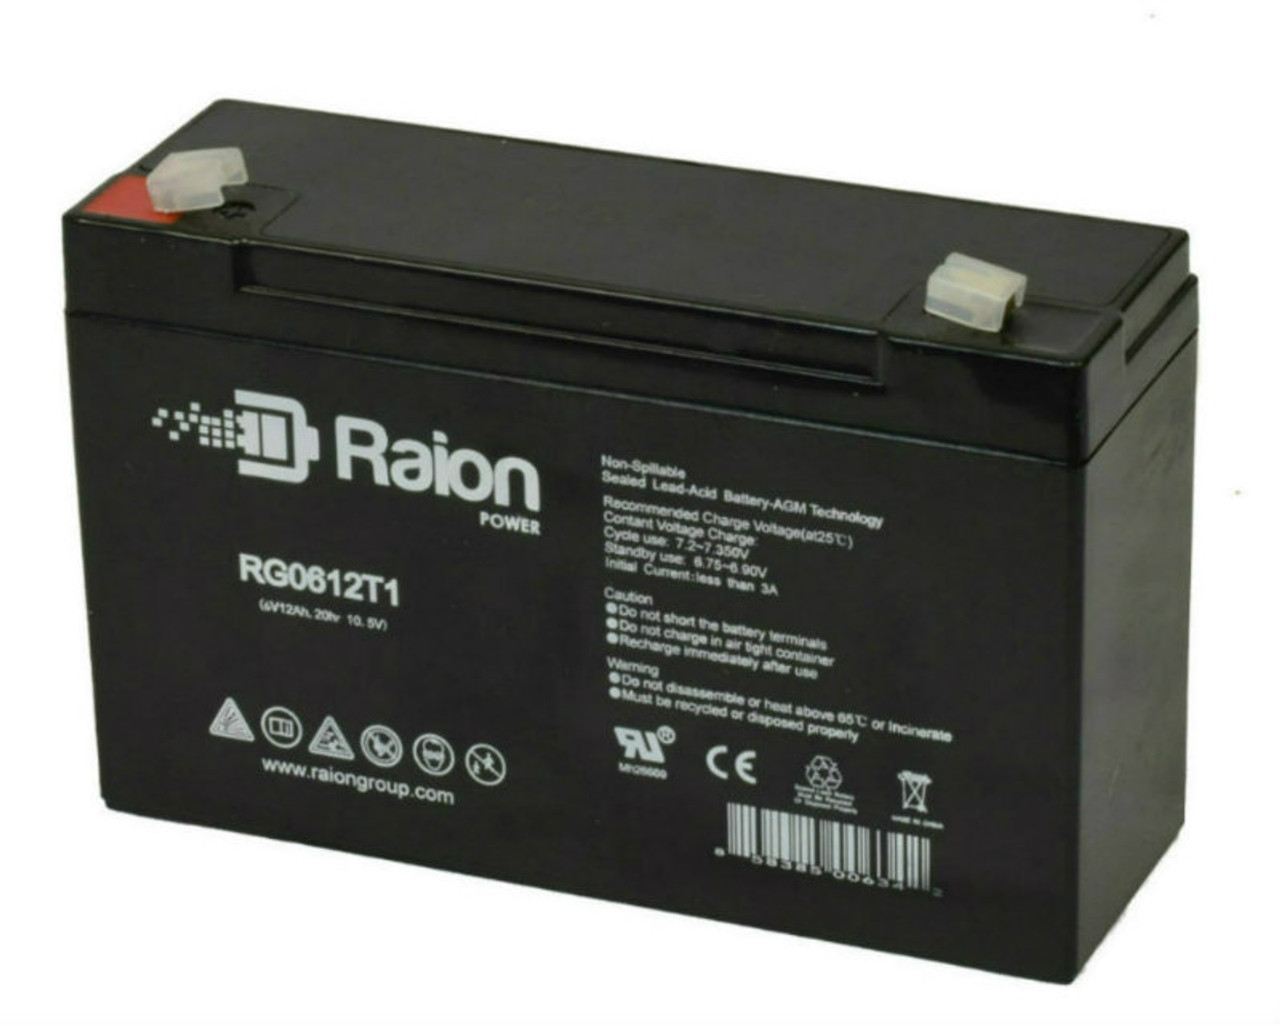 Raion Power RG06120T1 6V 12Ah Replacement UPS Battery Cartridge for Powerware PW5119-3000RM